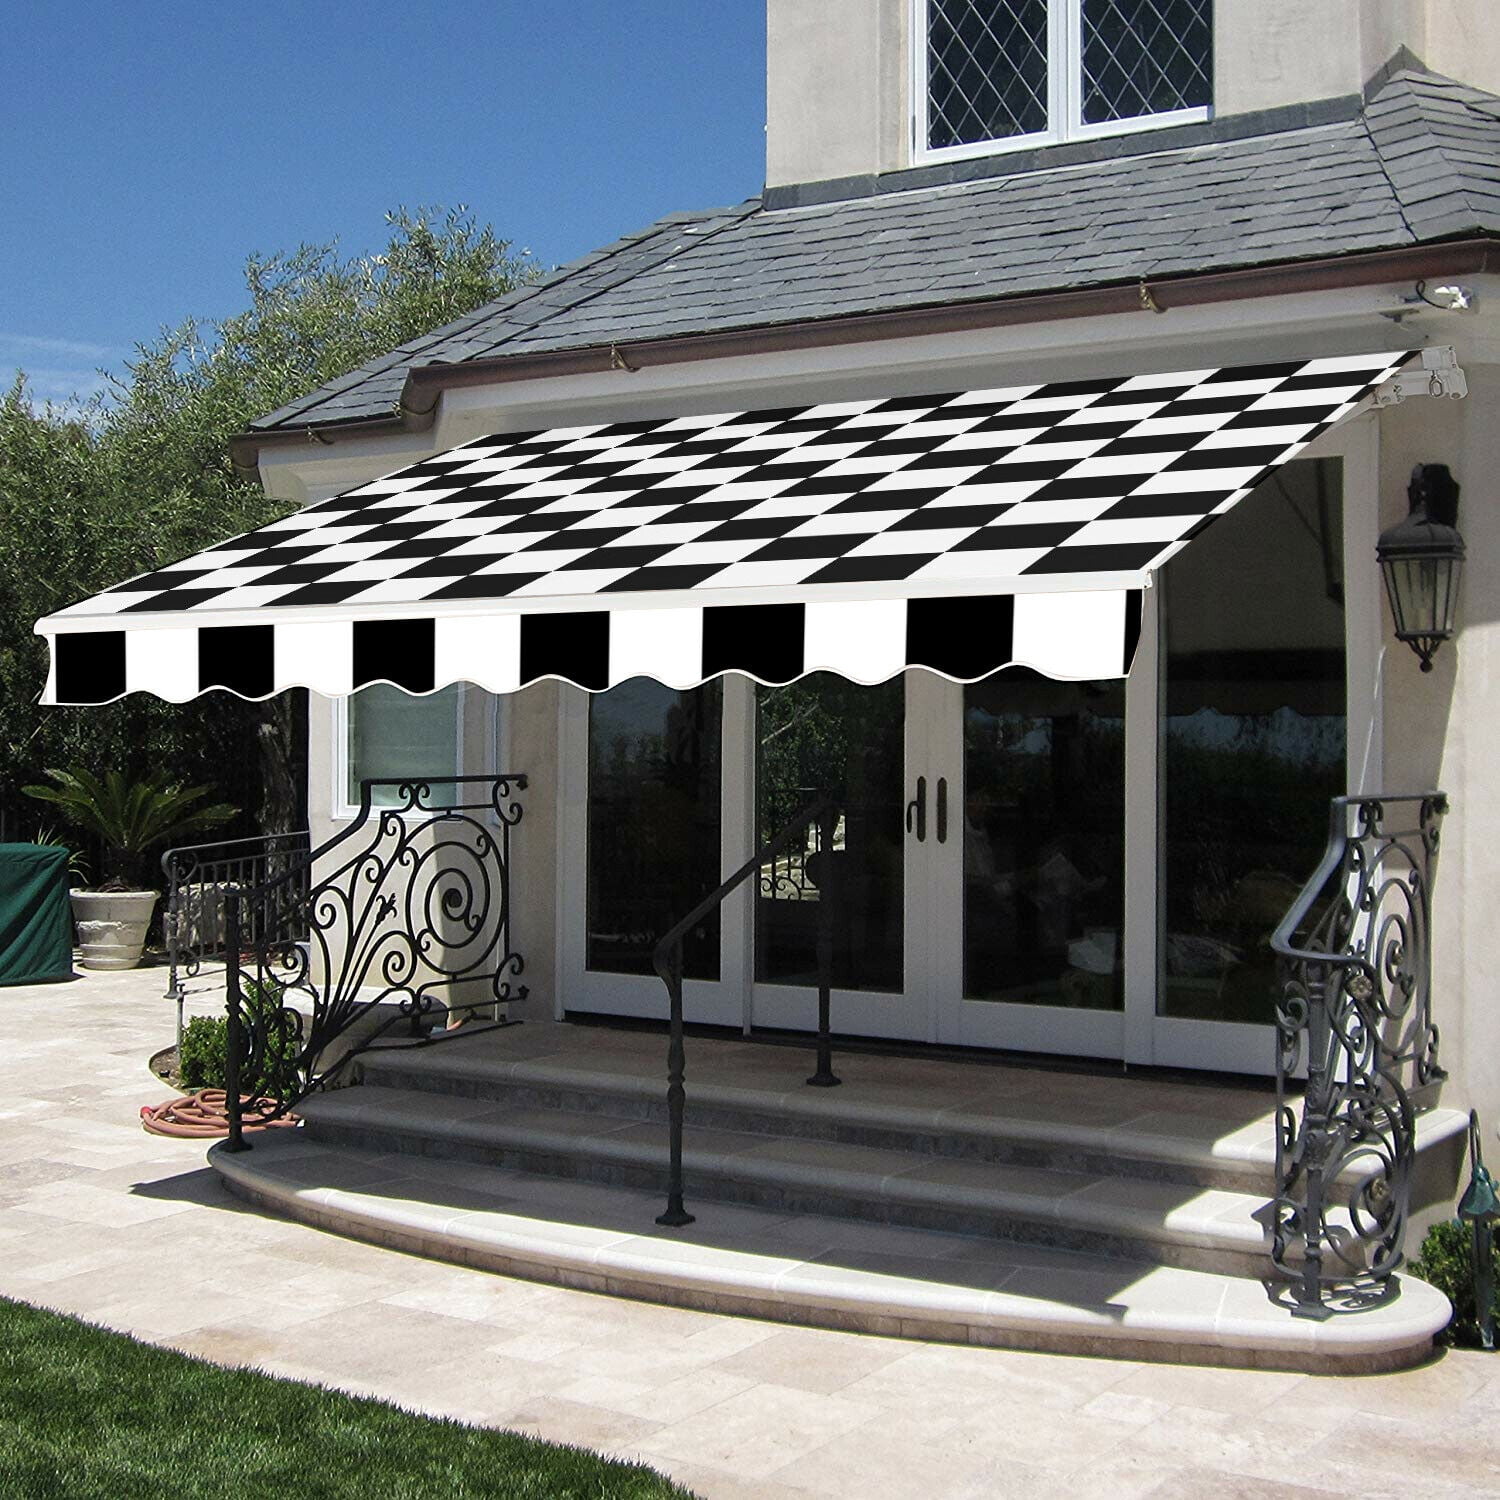 13'x8' Manual Retractable Patio Awning Sunshade Shelter Window Door Awning Commercial